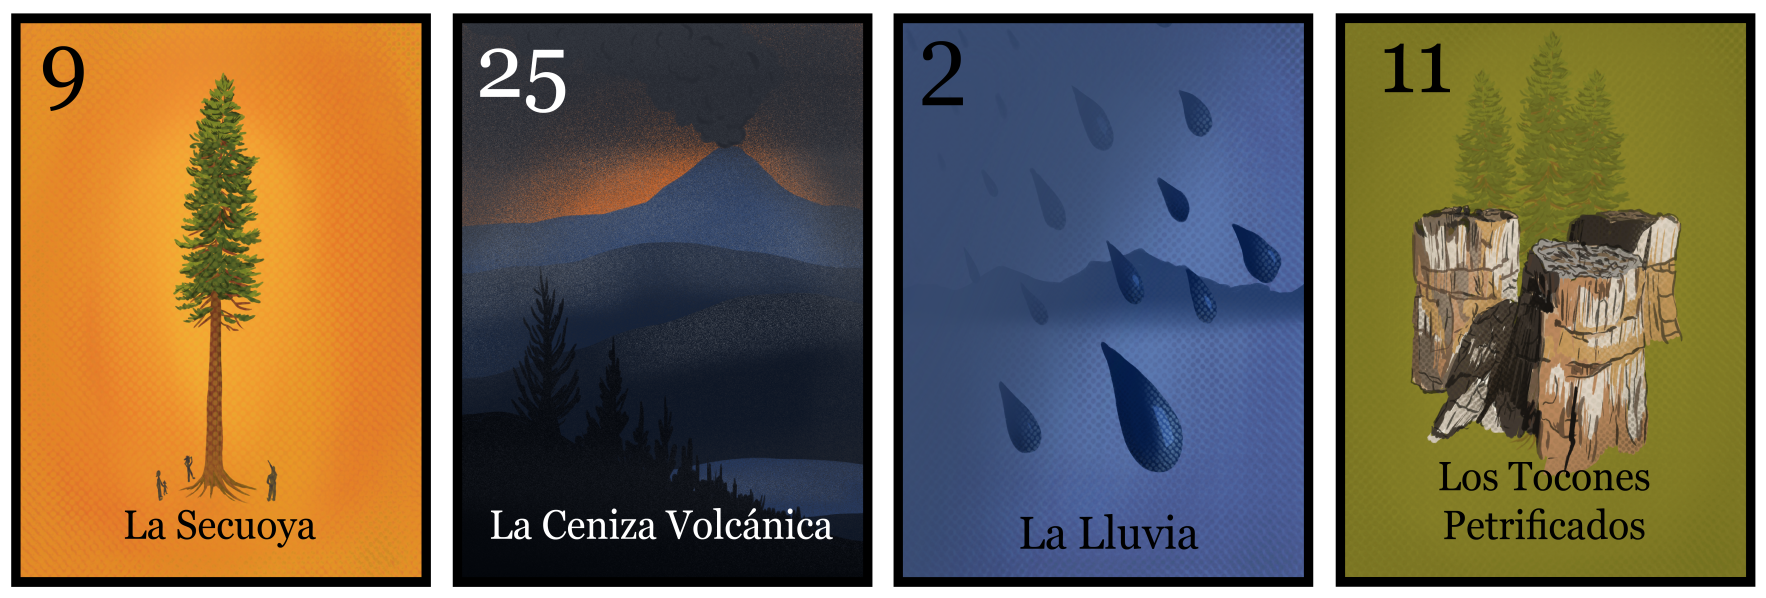 Banner of four cards. On the far left is a depiction of a towering Redwood tree. The next card shows a volcano spewing ash all over a landscape. The next card shows blue rain drops. To the far right is a trio of petrified Redwood stumps.